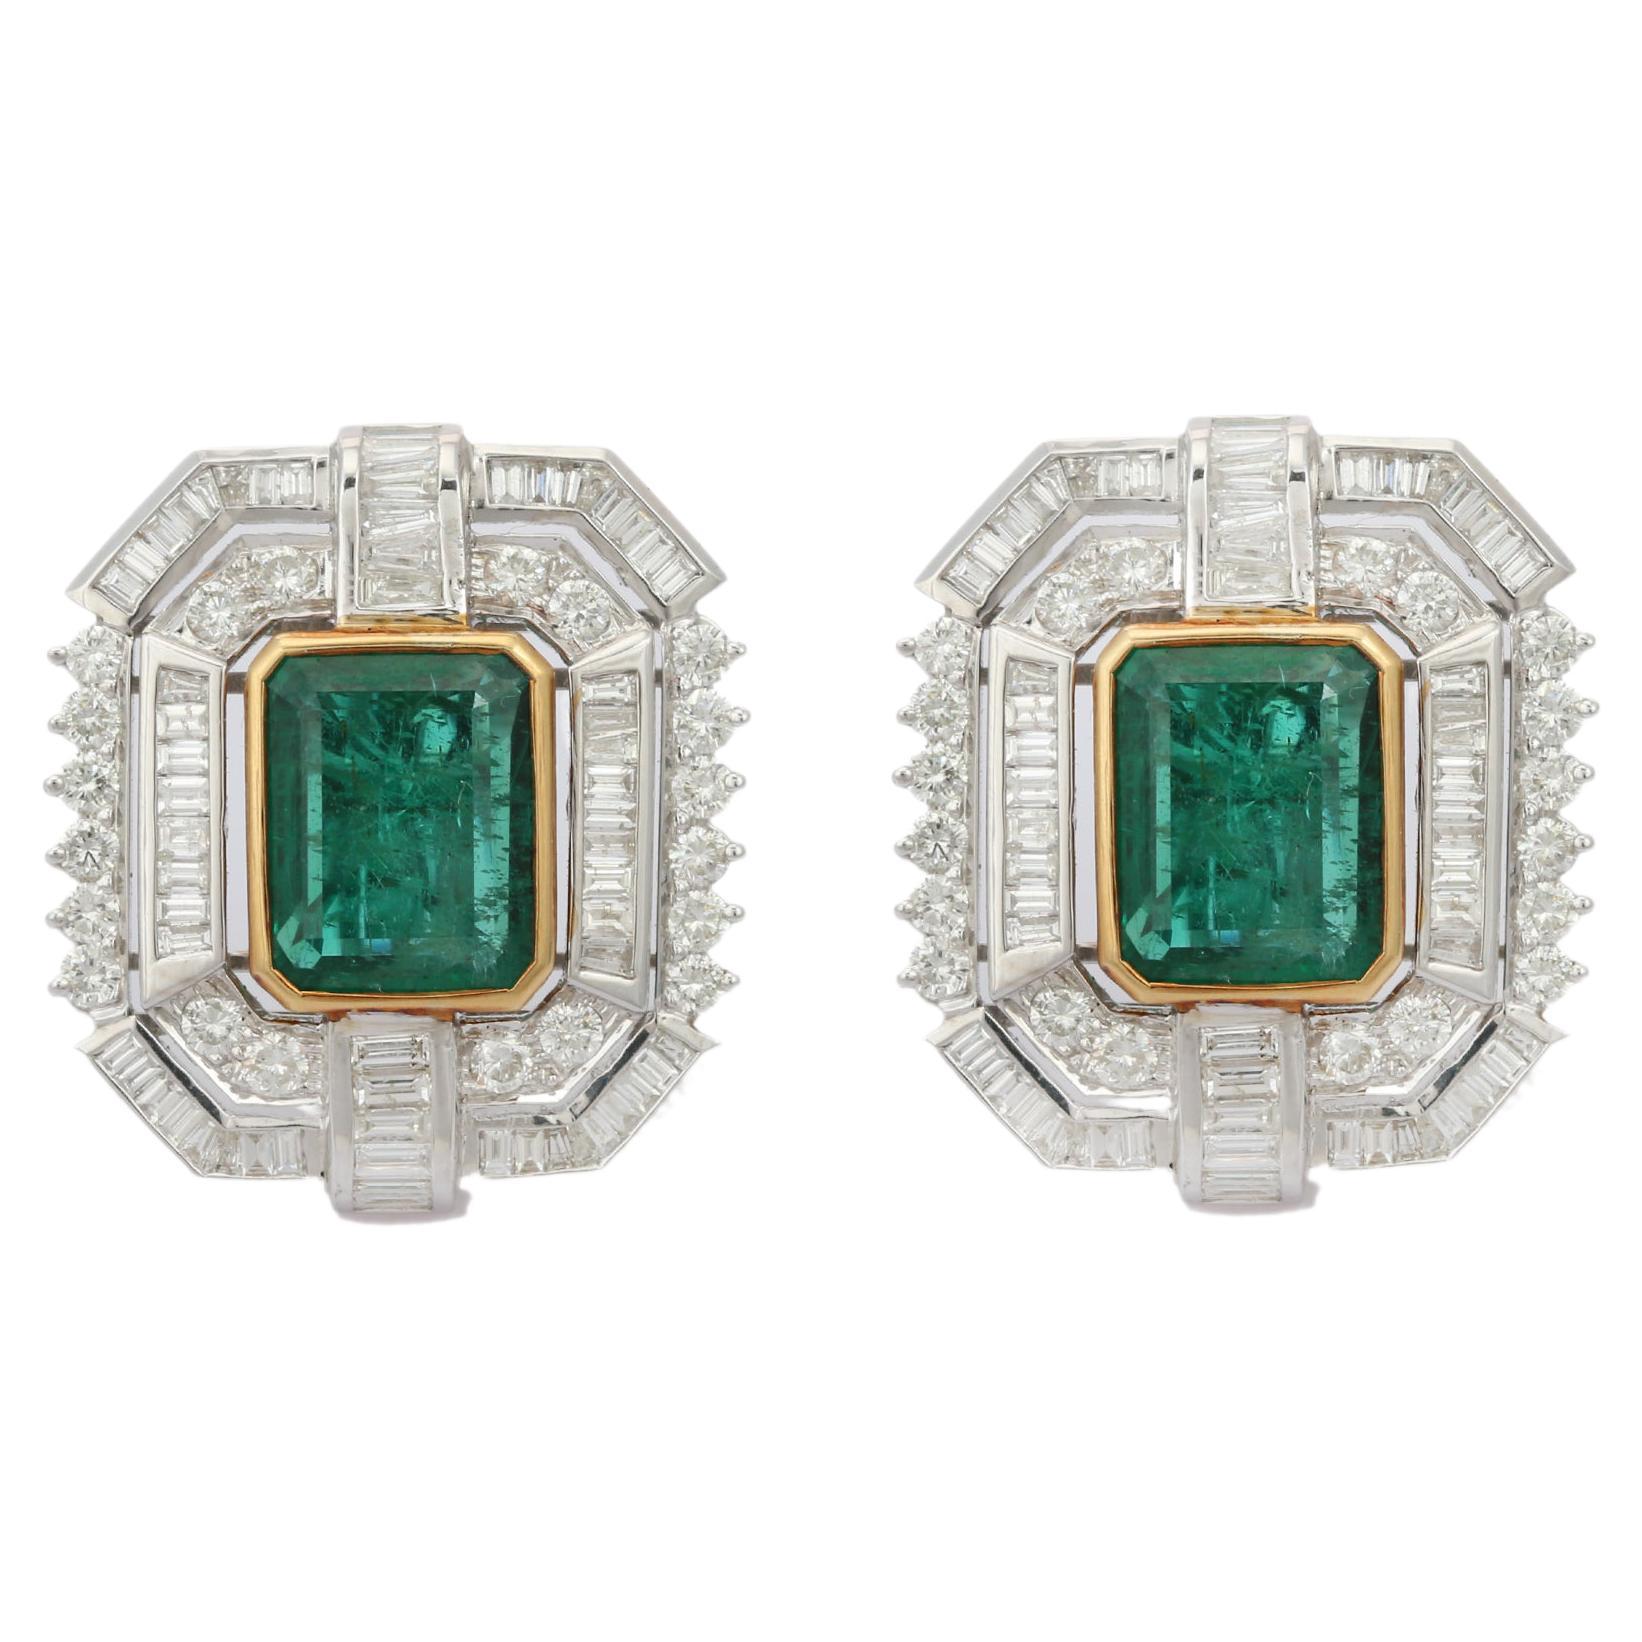 18kt Solid White Gold 9.7 ct Emerald Diamond Statement Stud Earrings For Wedding